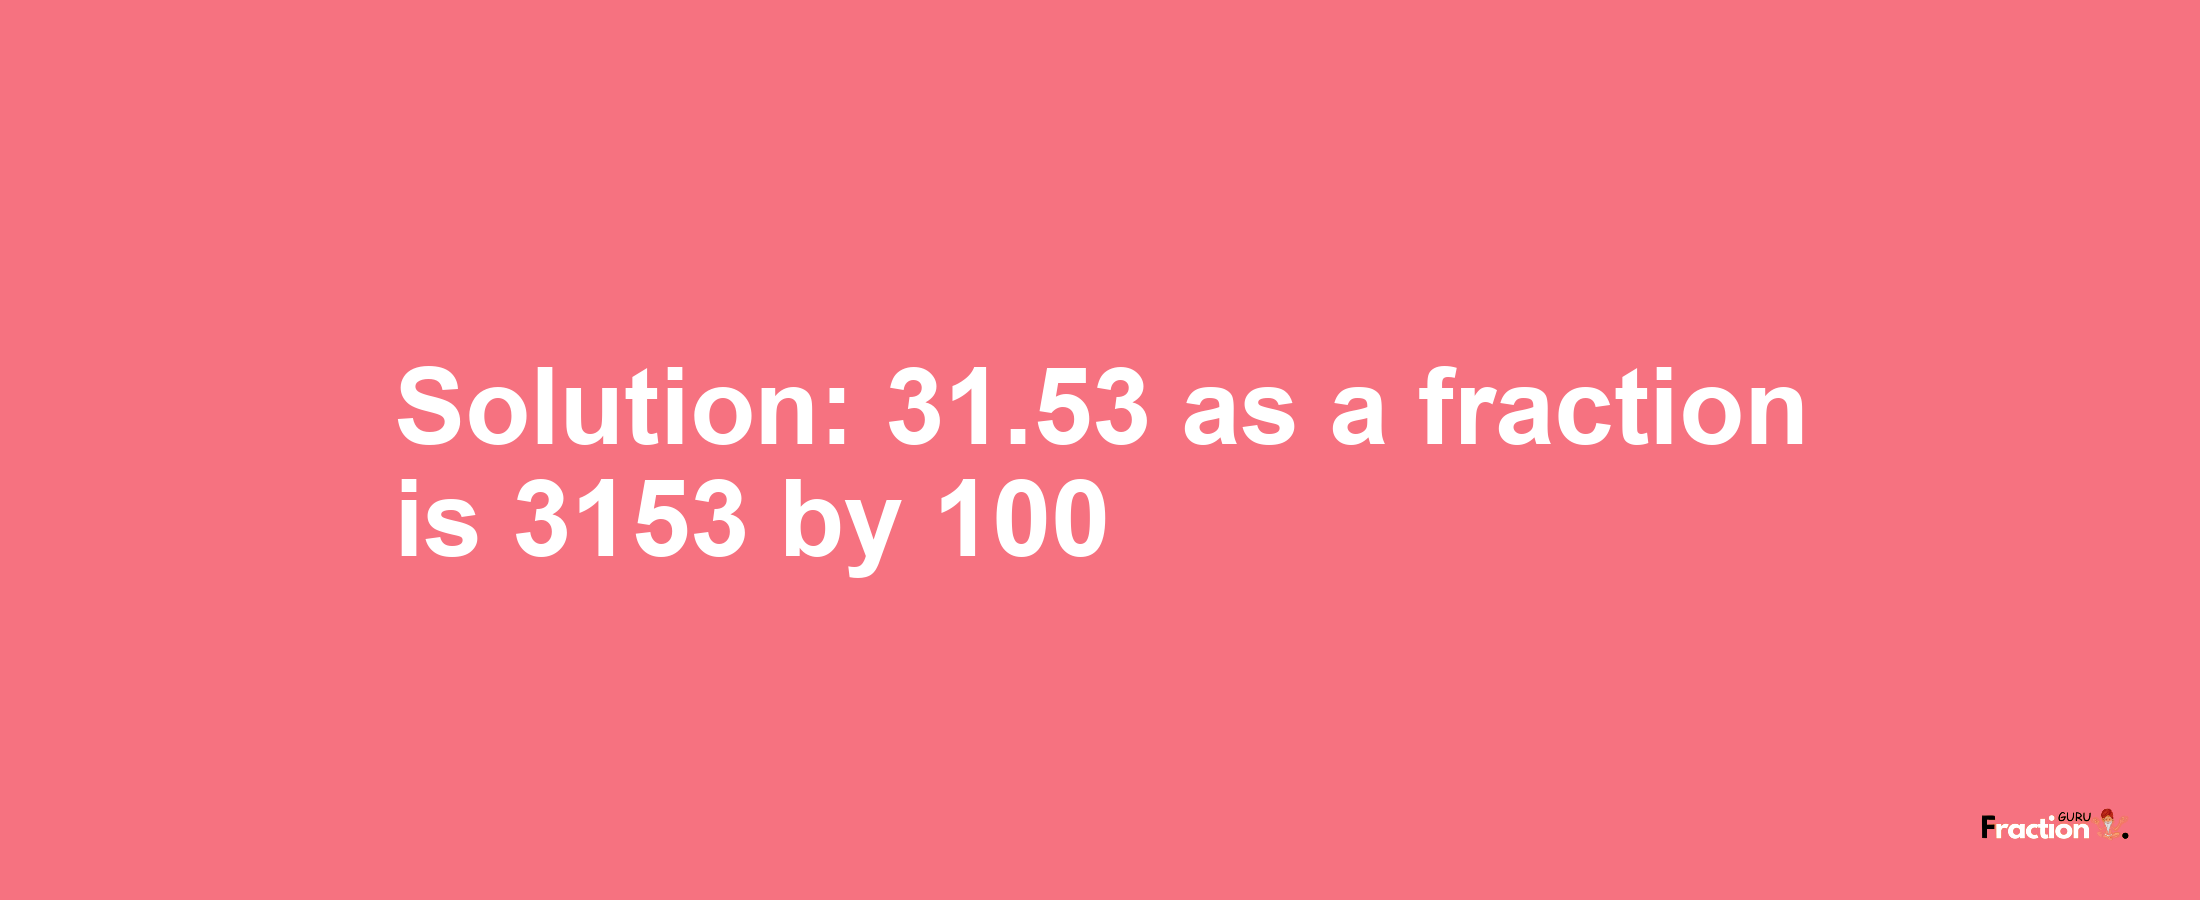 Solution:31.53 as a fraction is 3153/100